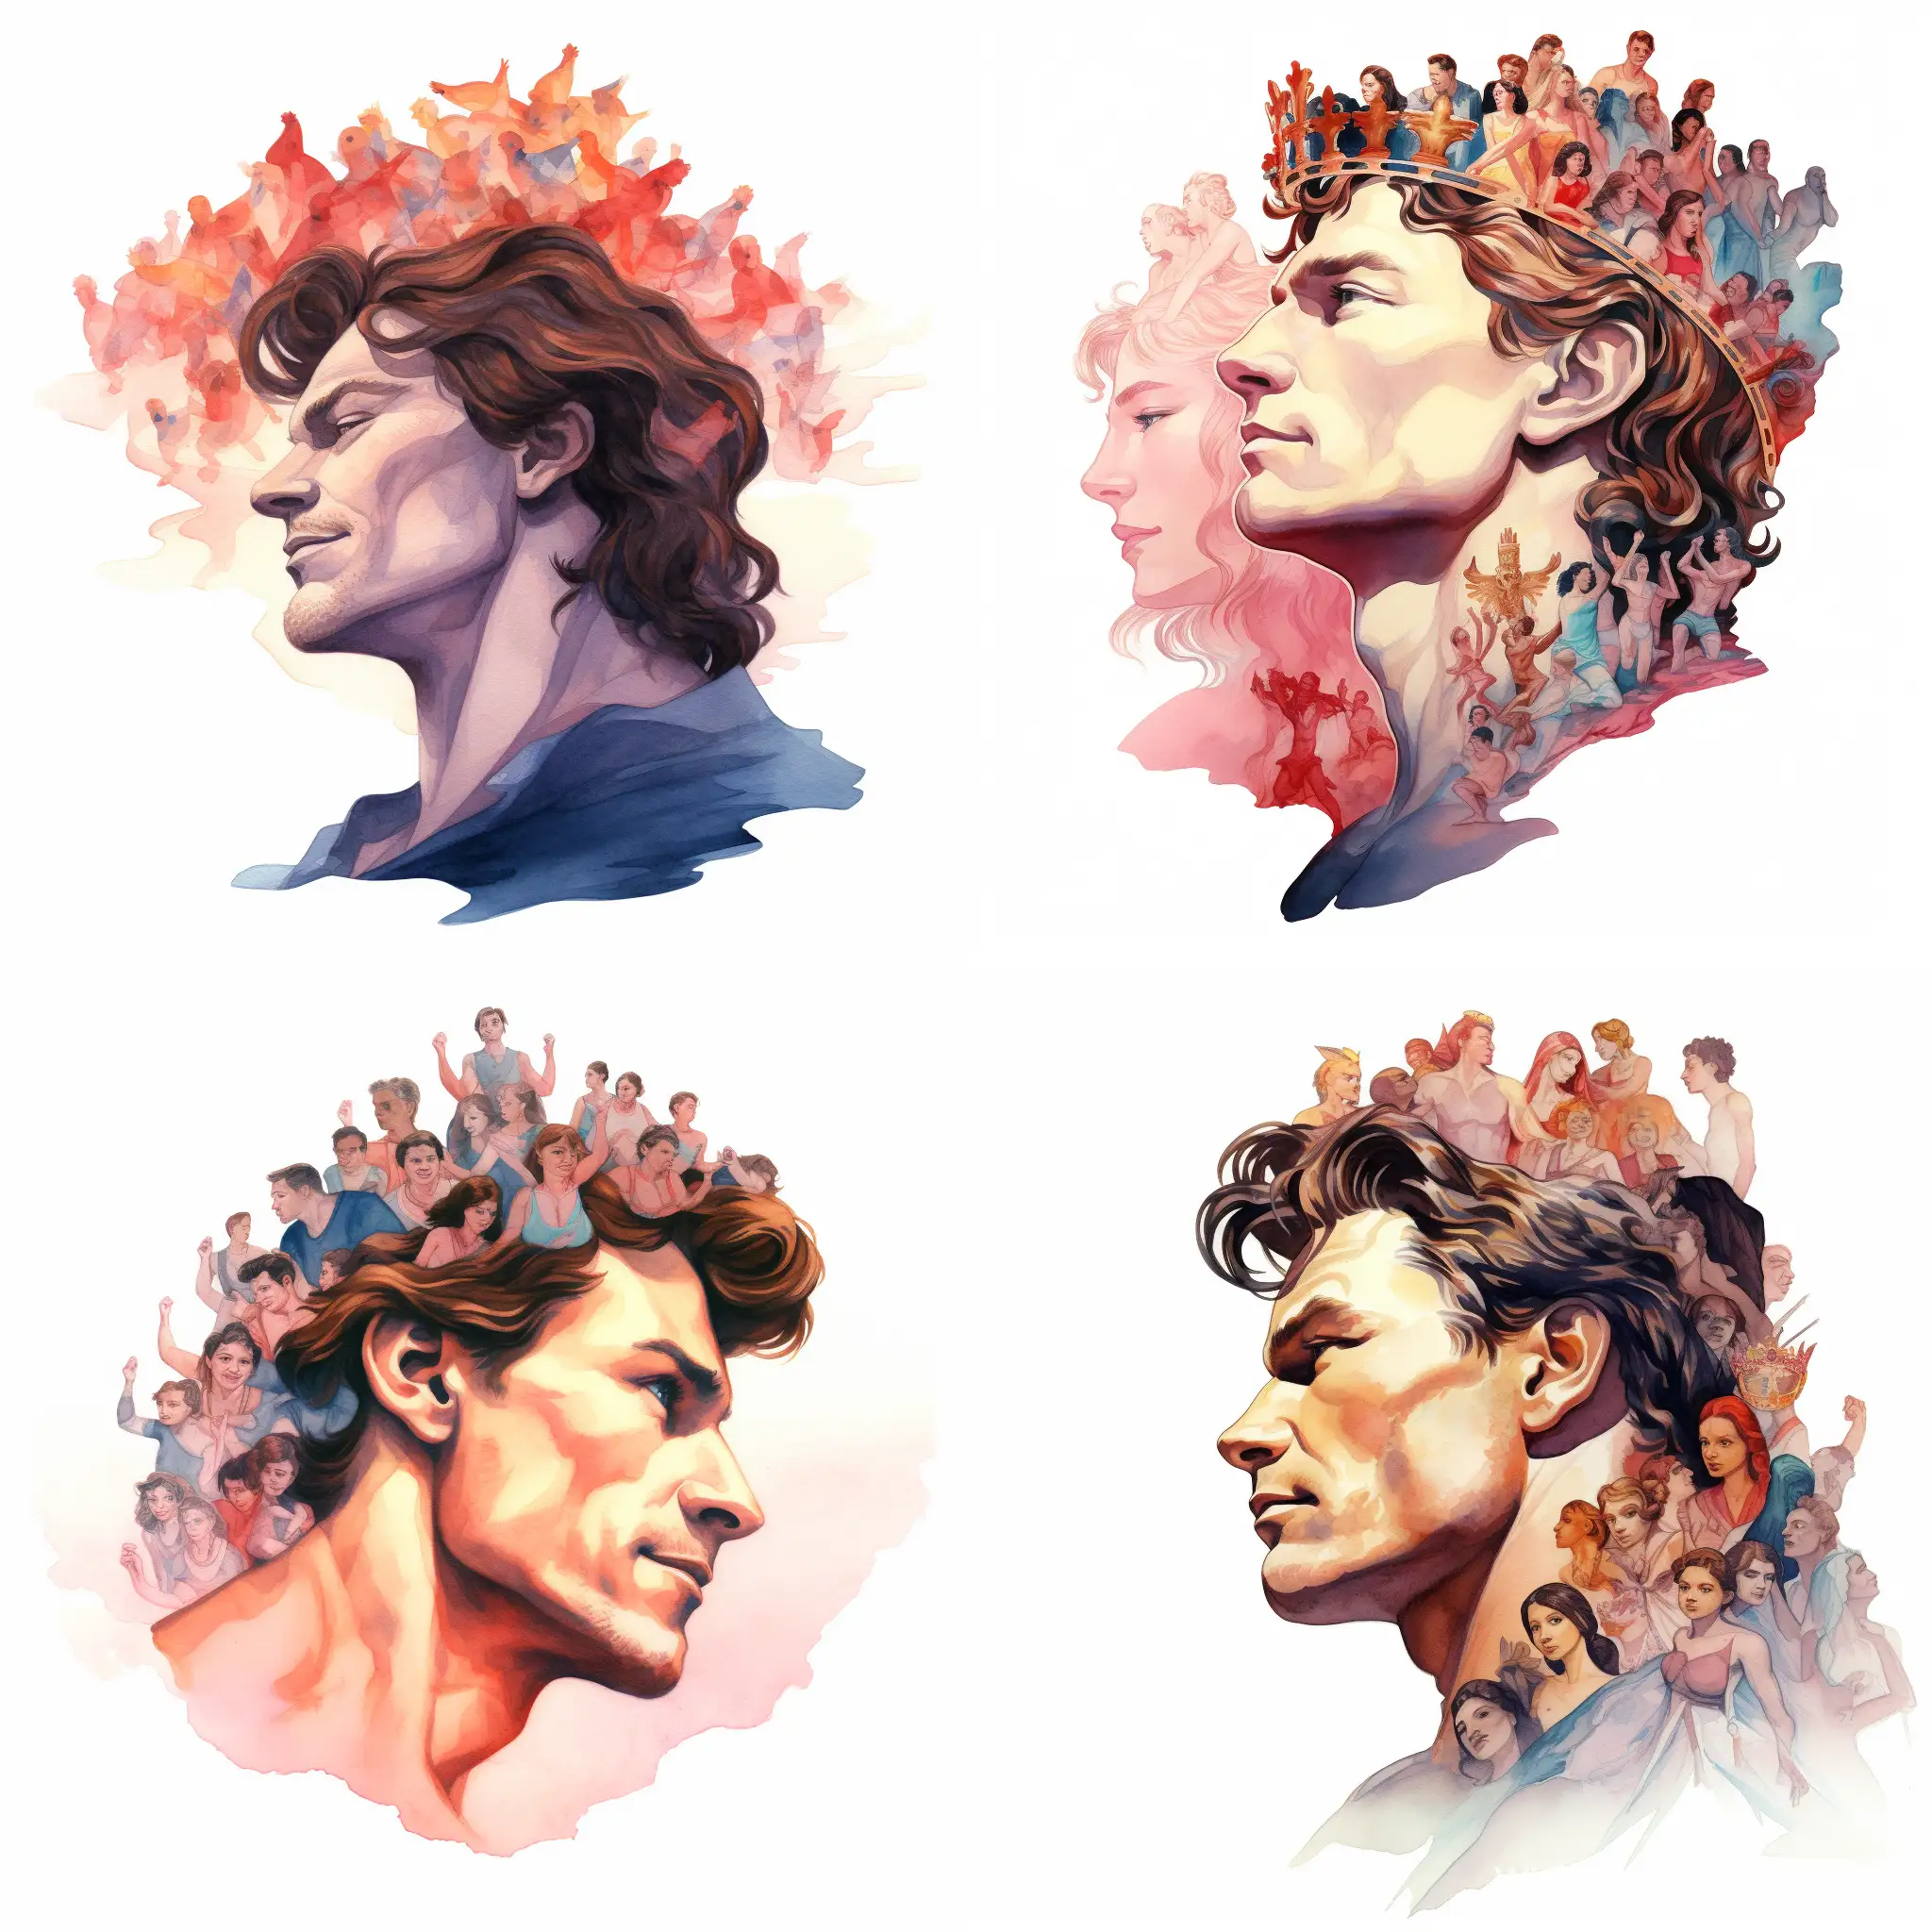 Patrick-Swayze-Crowned-in-Cinematic-Caricature-Delight